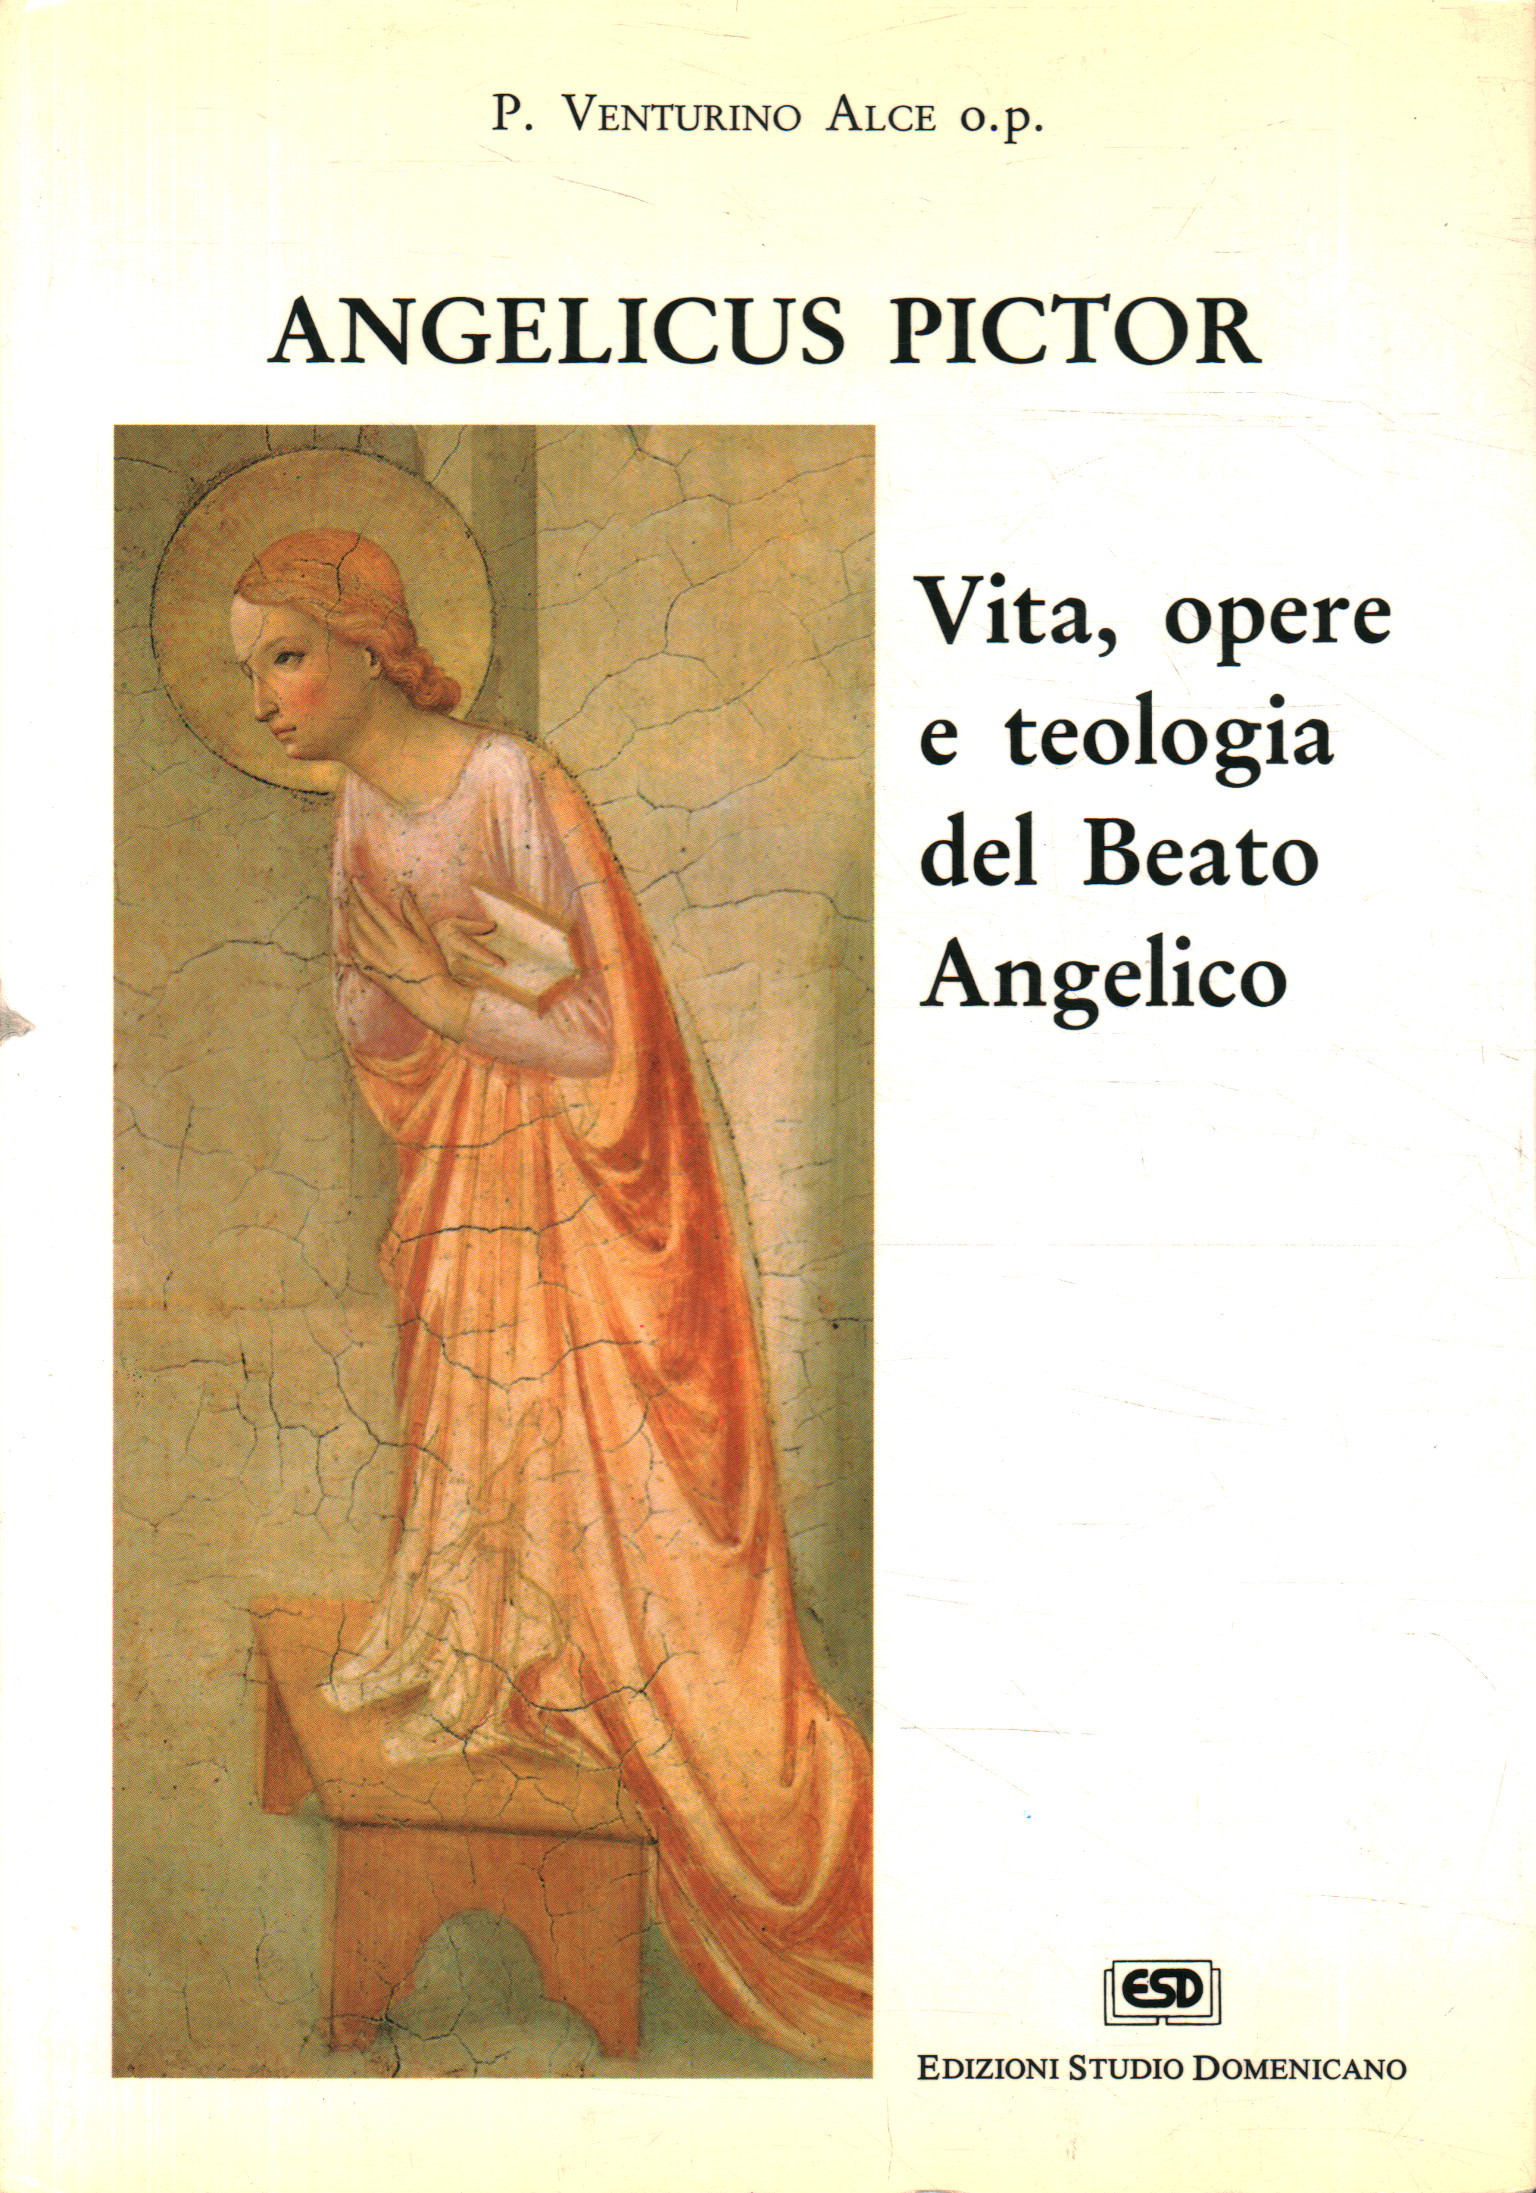 Angelicus Pictor. Life works and theology